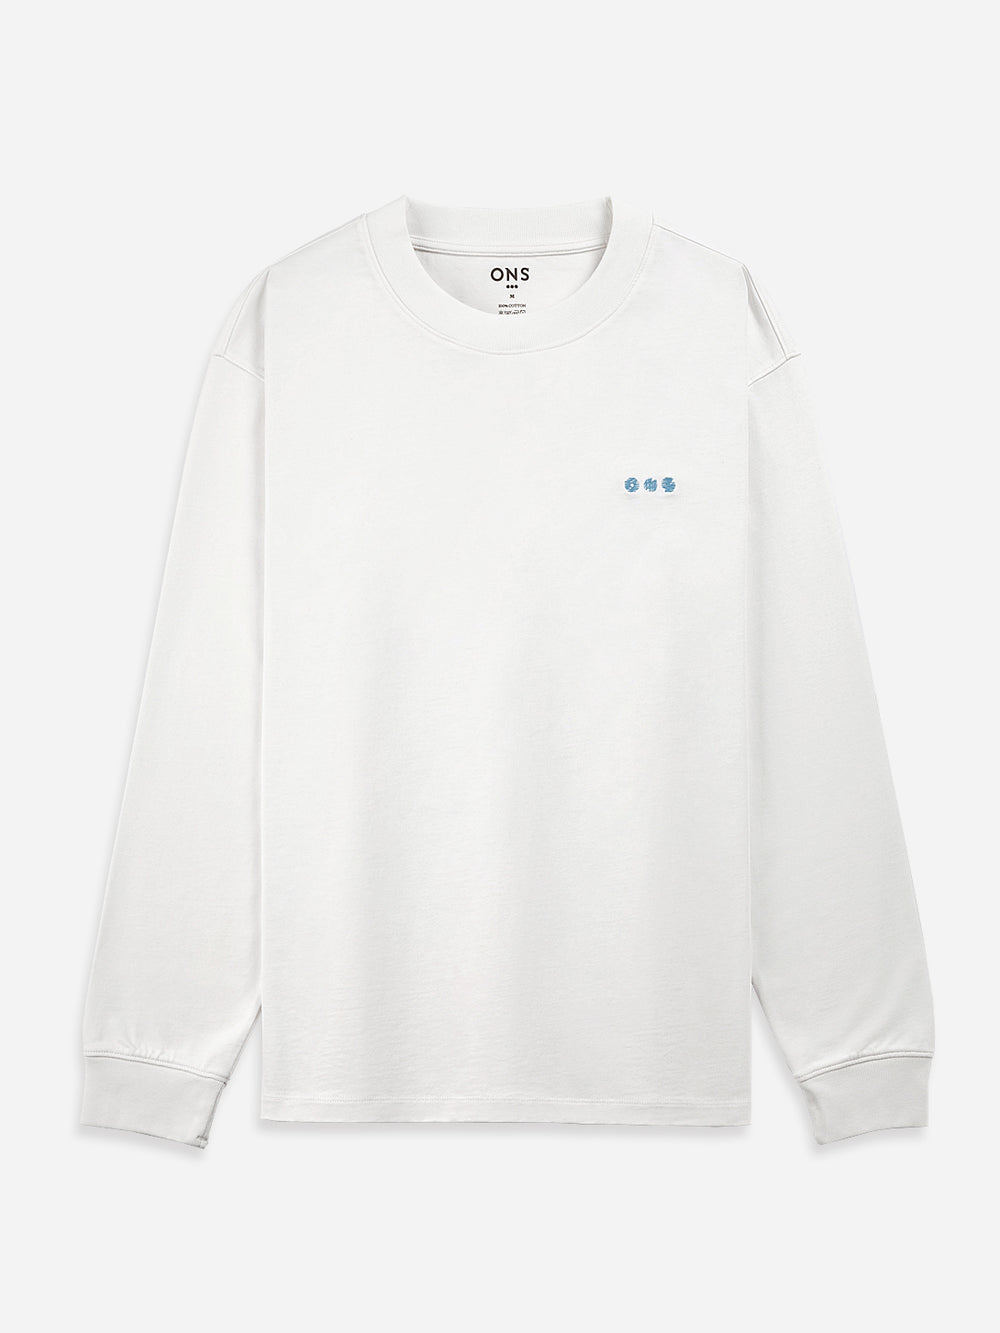 Off White Long Sleeve Mens Graphic Tee